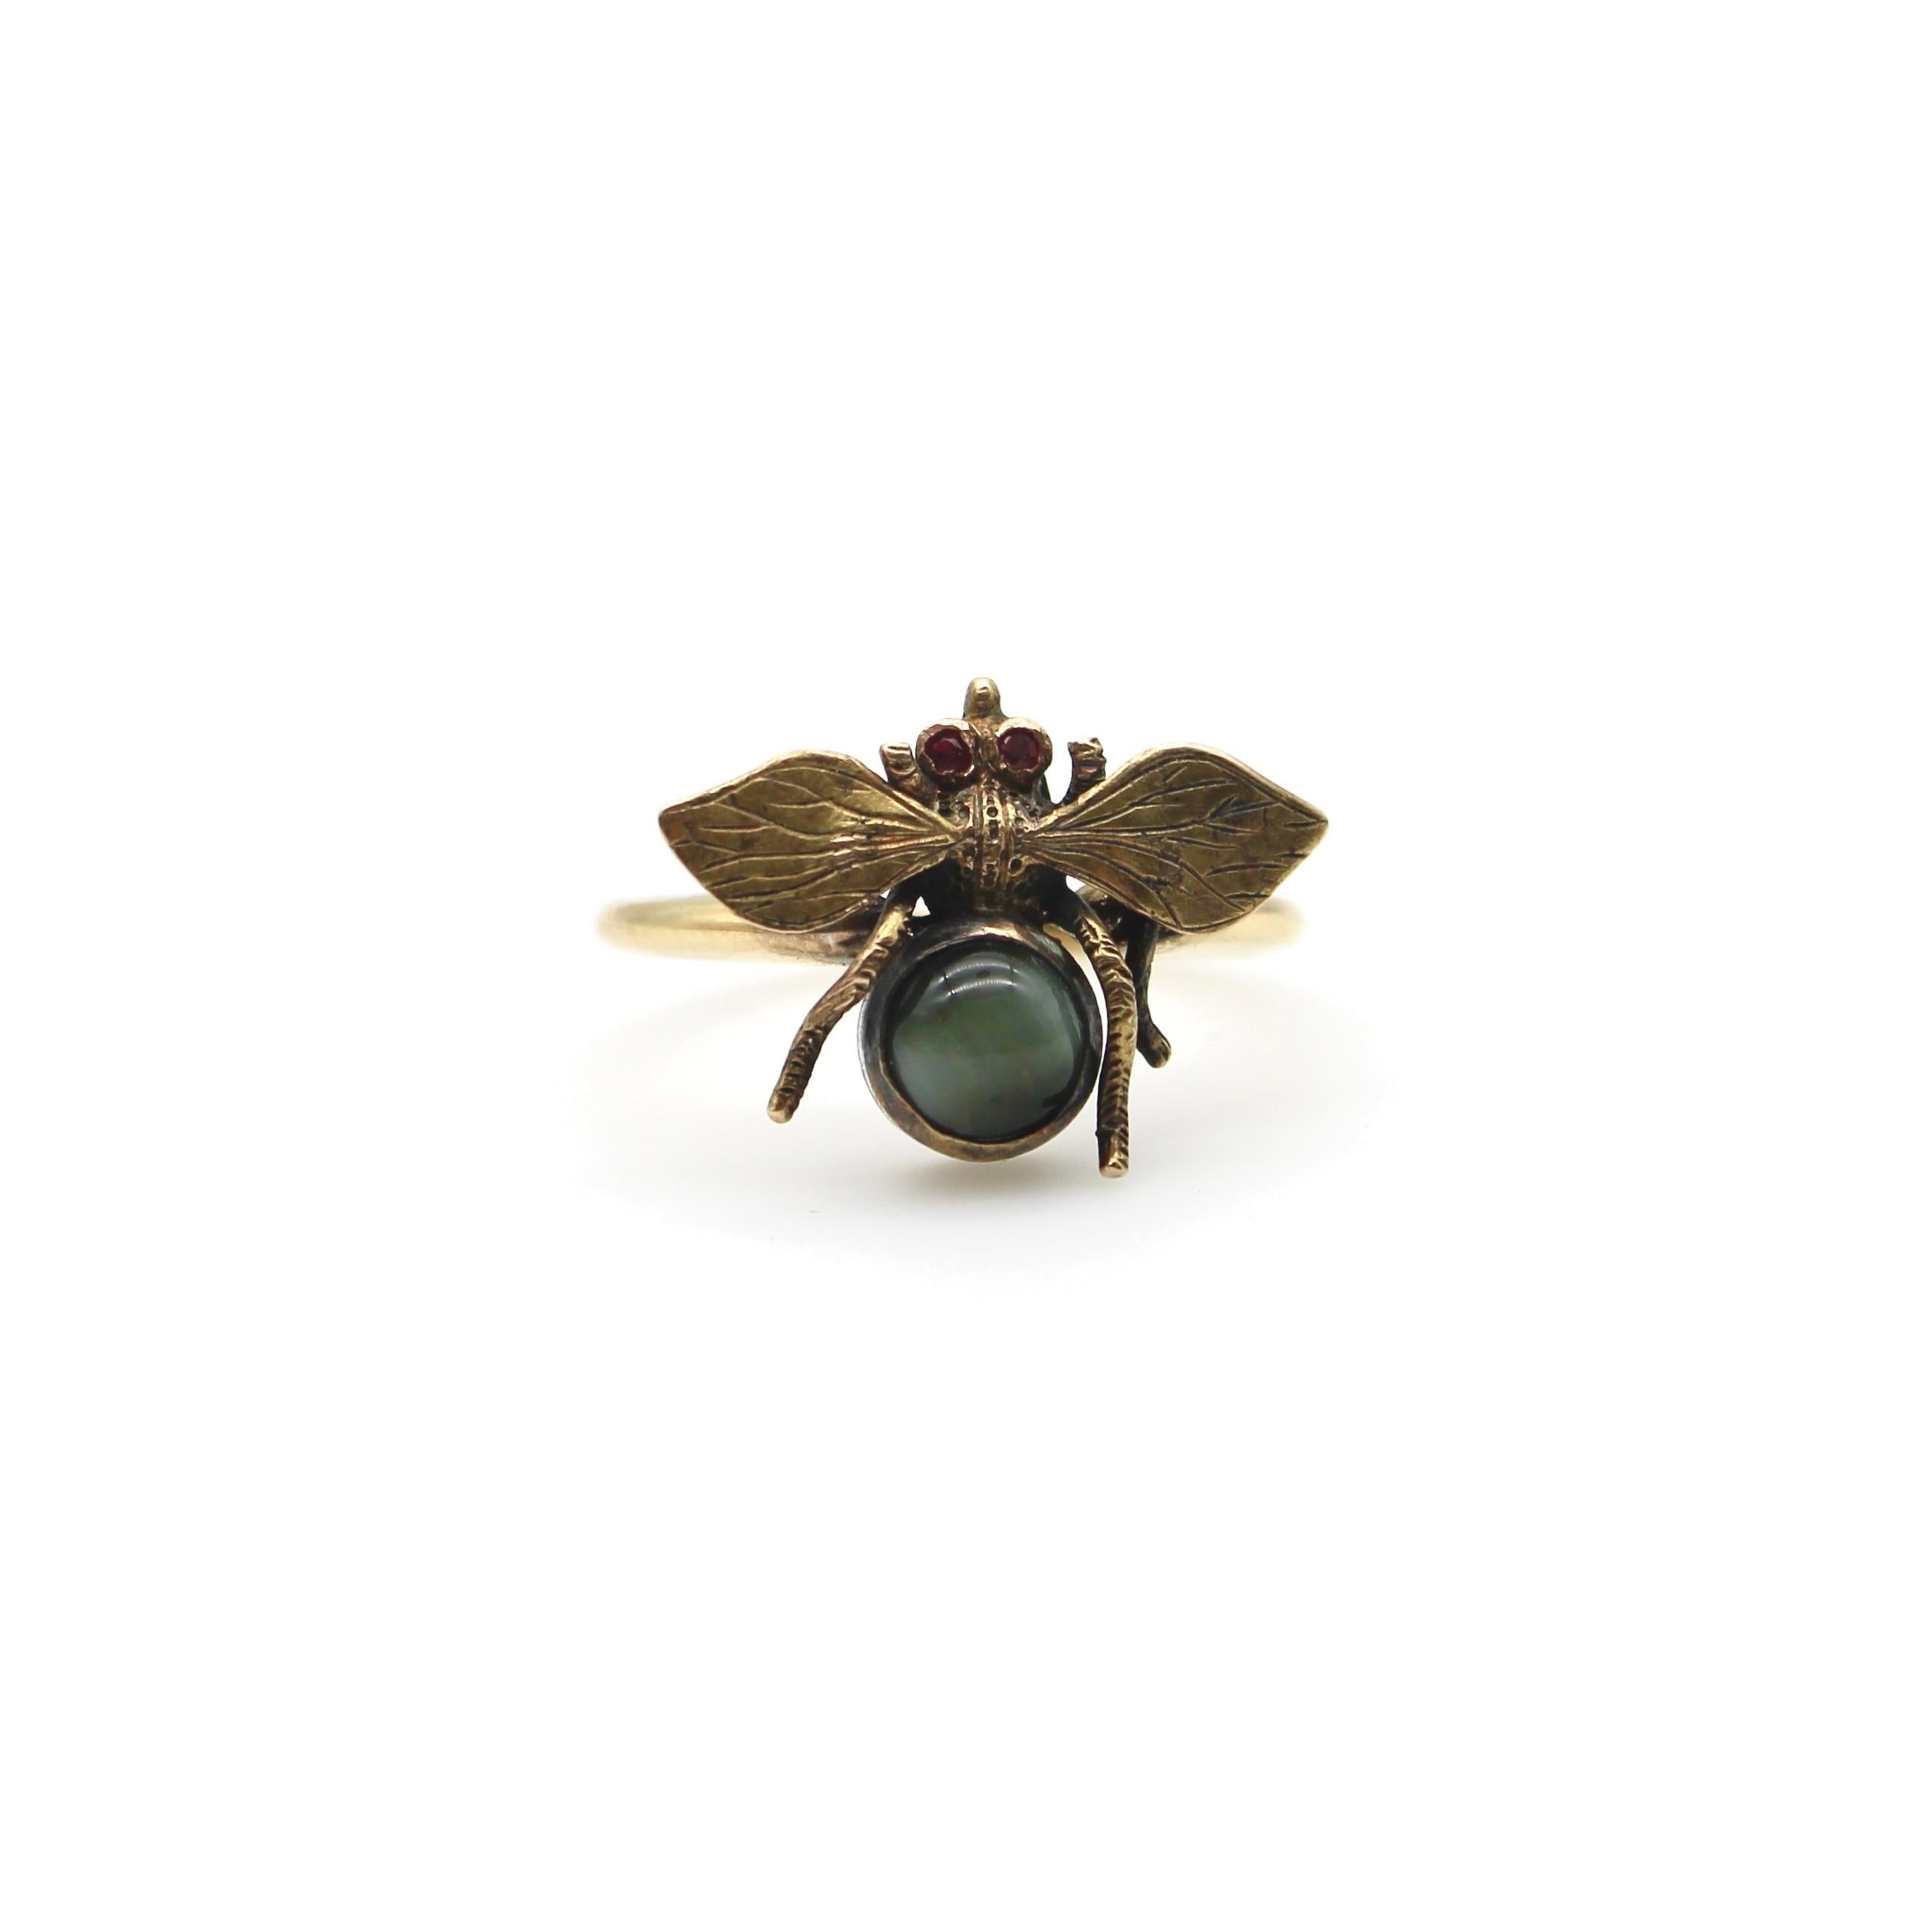 A beautiful Victorian era Bee ring made from a stick pin. It has bezel set rubies for eyes and a grey cats eye gemstone for the thorax. In the language of Victorian era symbolism and sentimentality, the bee came to signify keeping busy, teamwork and